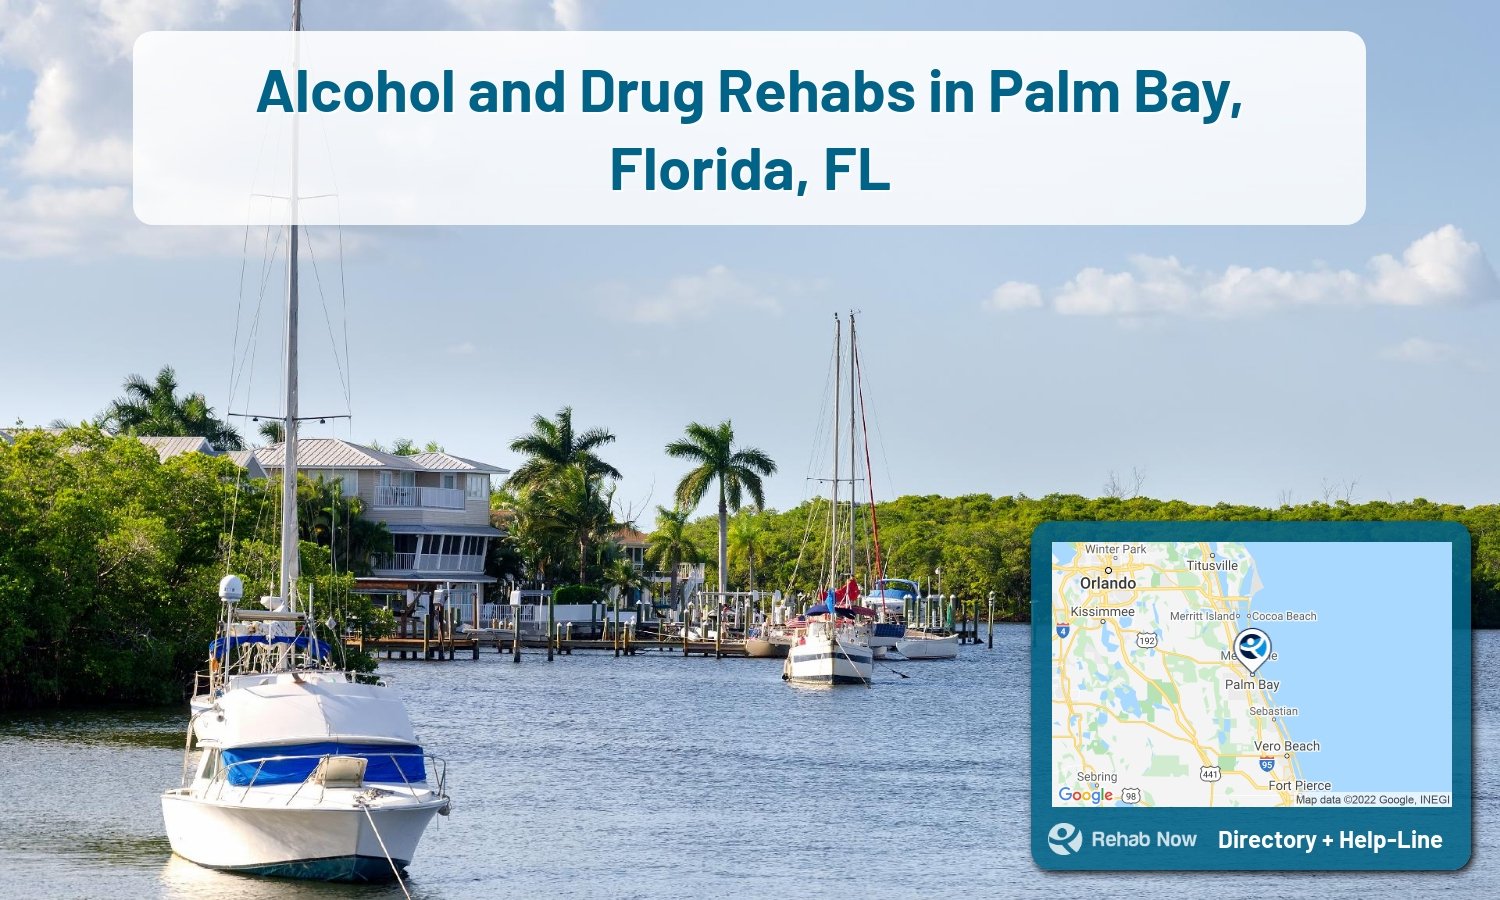 Need treatment nearby in Palm Bay, Florida? Choose a drug/alcohol rehab center from our list, or call our hotline now for free help.